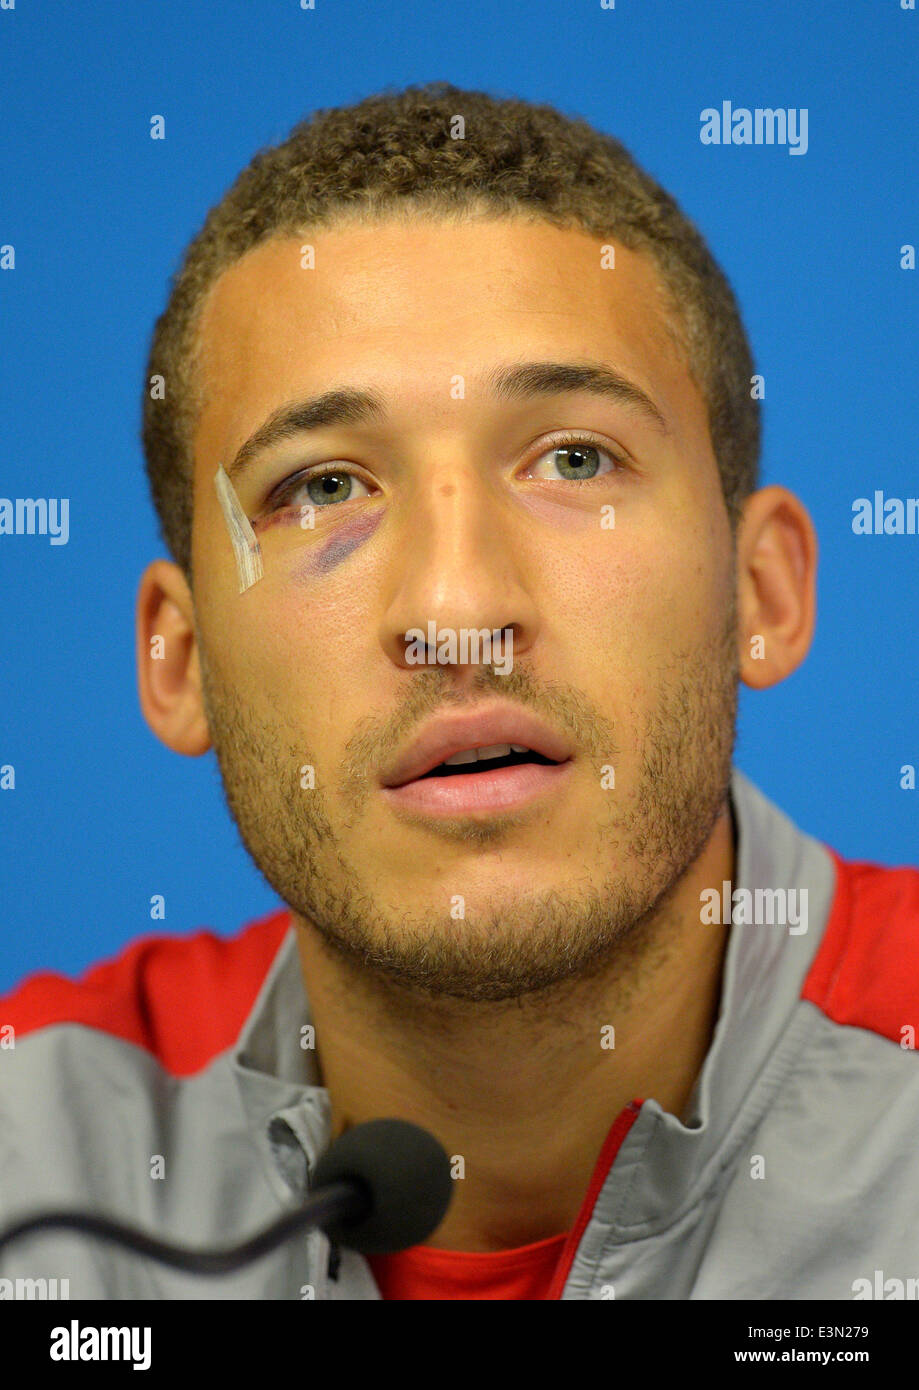 Recife, Brazil. 25th June, 2014. Fabian Johnson during a press conference of the USA national soccer team in the Arena Pernambuco in Recife, Brazil, 25 June 2014. The FIFA World Cup 2014 will take place in Brazil from 12 June to 13 July 2014. Photo: Thomas Eisenhuth/dpa/Alamy Live News Stock Photo